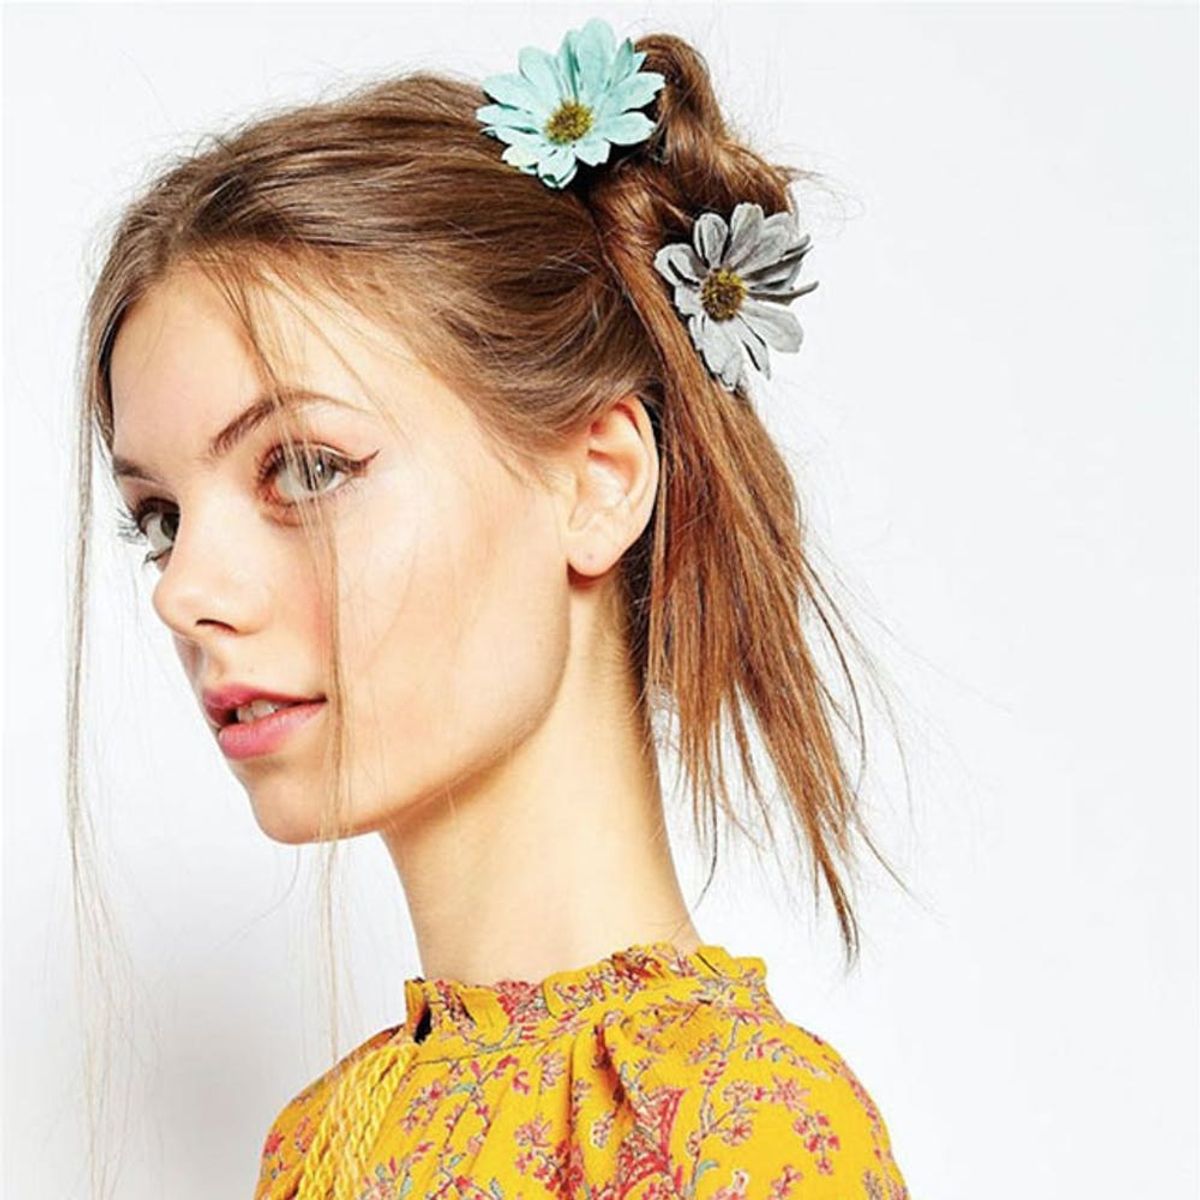 15 Easy Ways to Accessorize Your Easter Hair